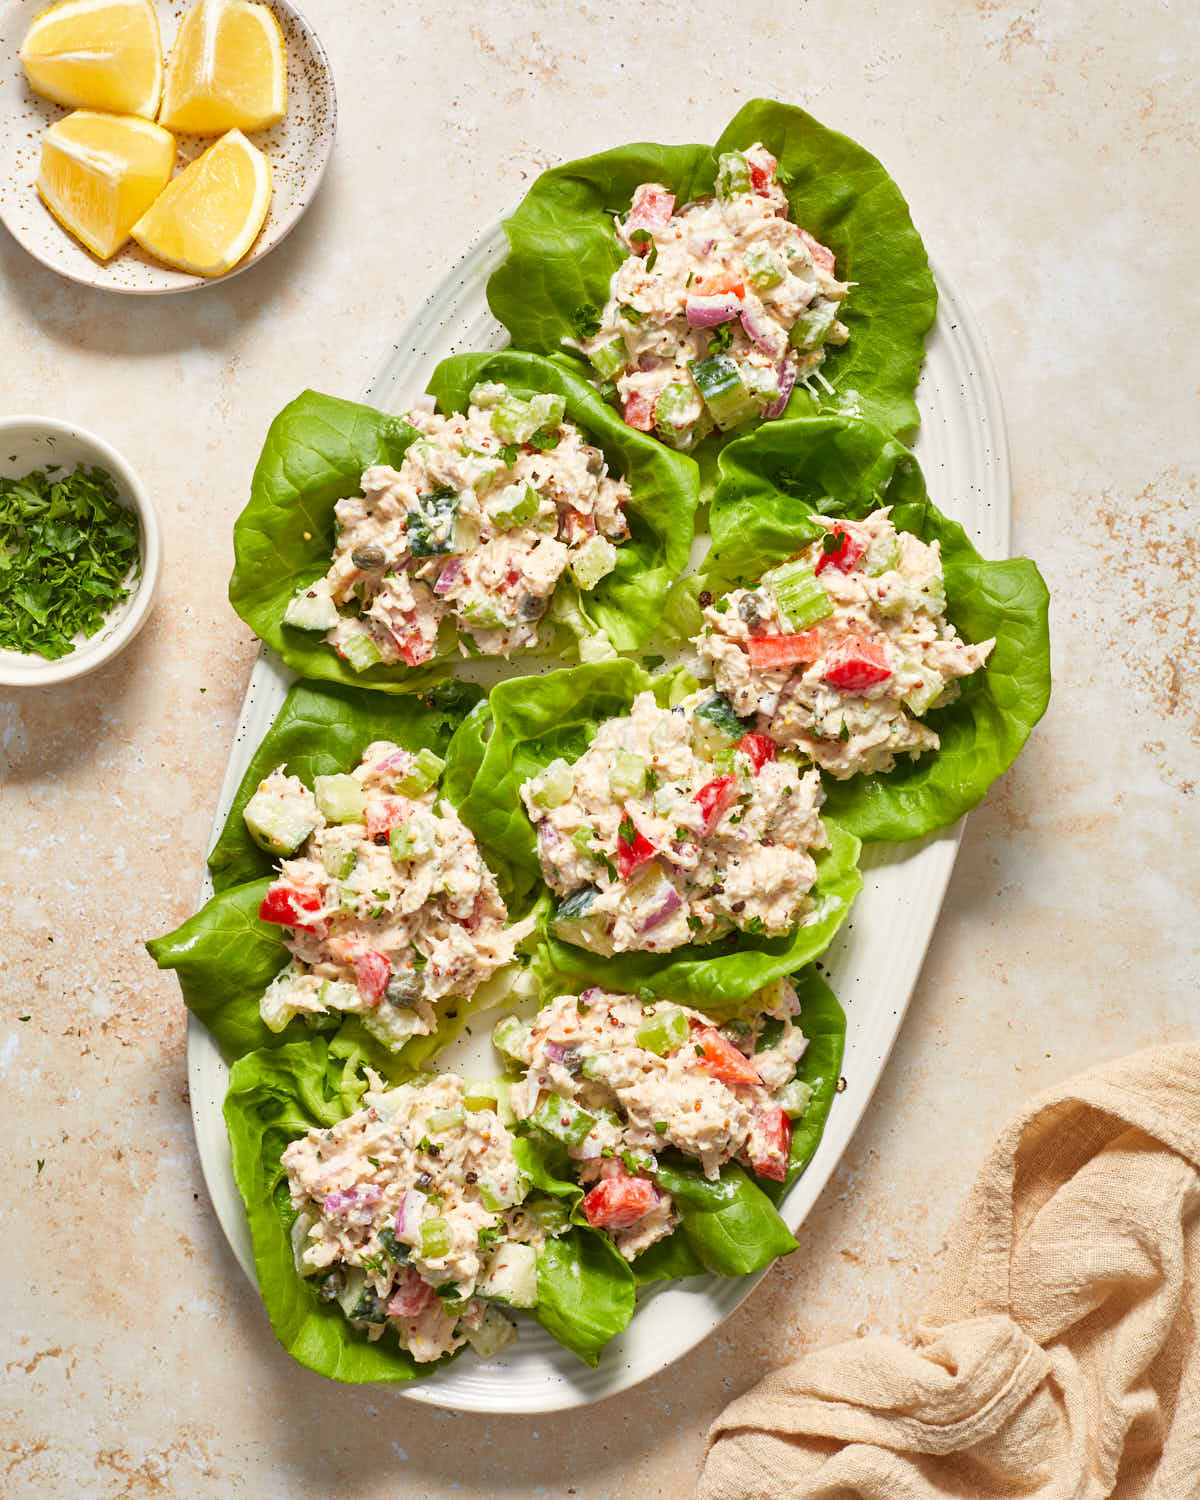 Tuna lettuce wraps arranged on an oval platter with lemons and chopped herbs on the side.